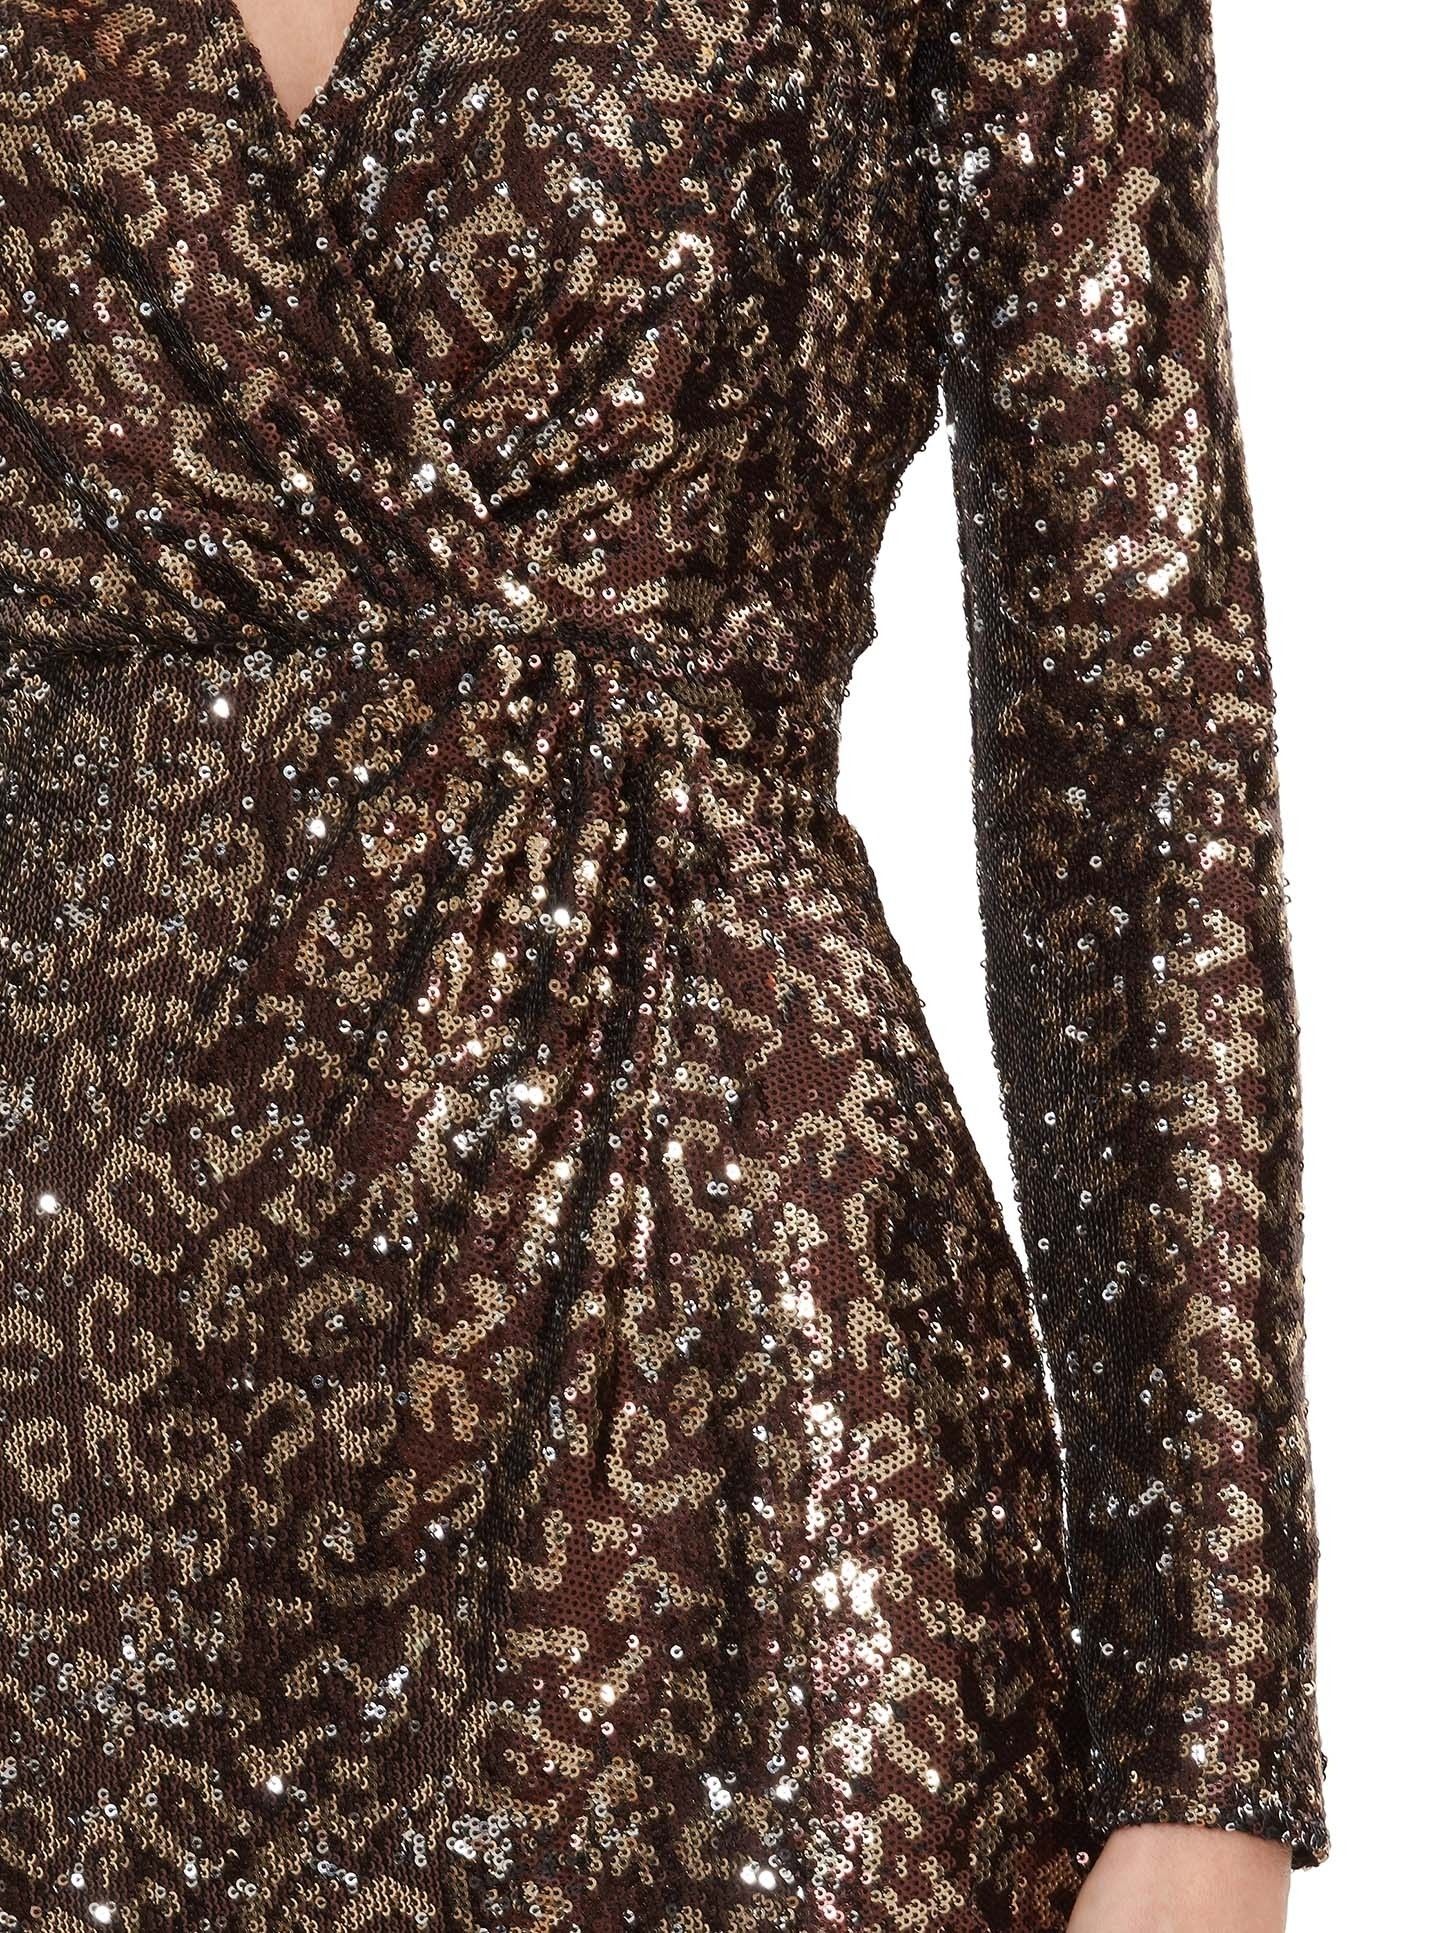 This gorgeous wrap dress by Gina Bacconi is sure to make you stand out. This low cut sequin dress is perfect for a party or special occasion. With ruching and a split hem for a classic look.